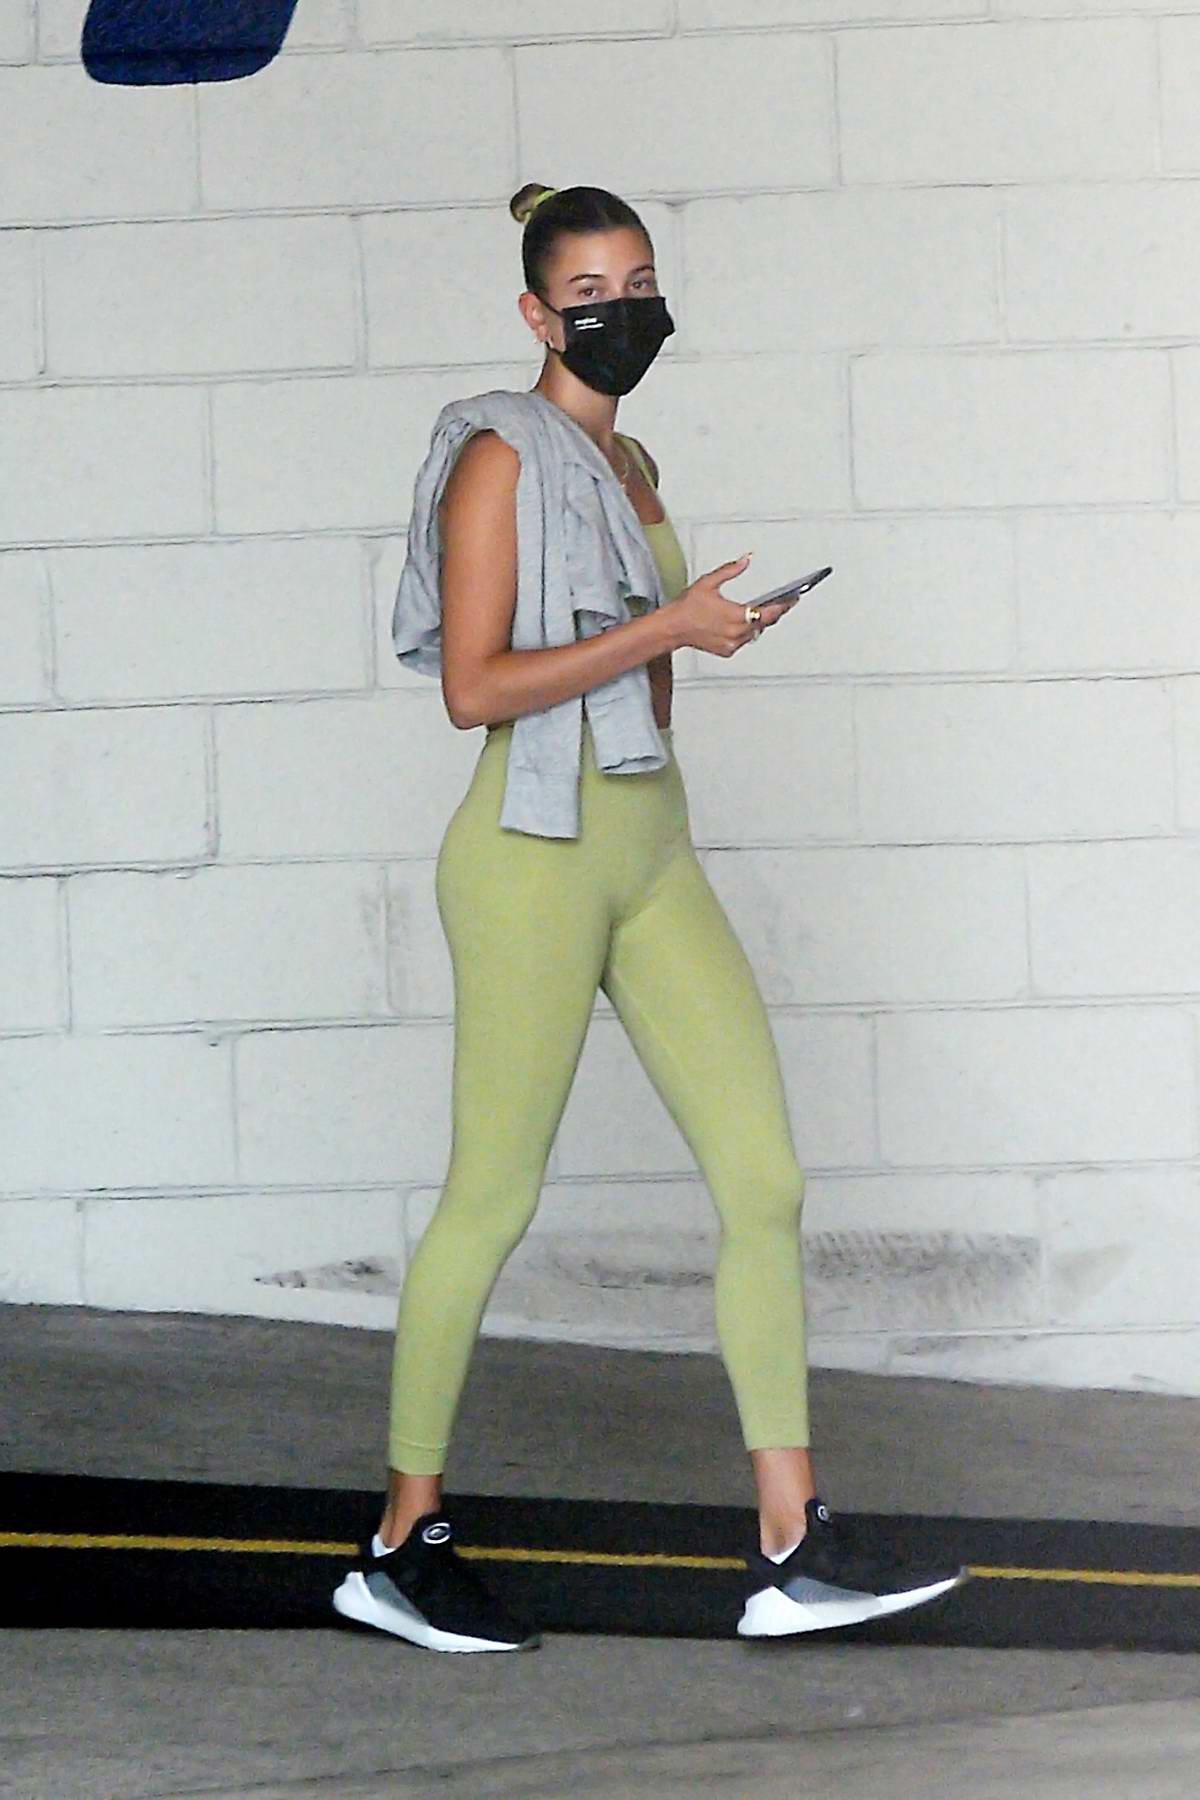 https://www.celebsfirst.com/wp-content/uploads/2020/08/hailey-bieber-sports-a-green-workout-top-and-leggings-as-she-hits-the-gym-in-los-angeles-210820_5.jpg